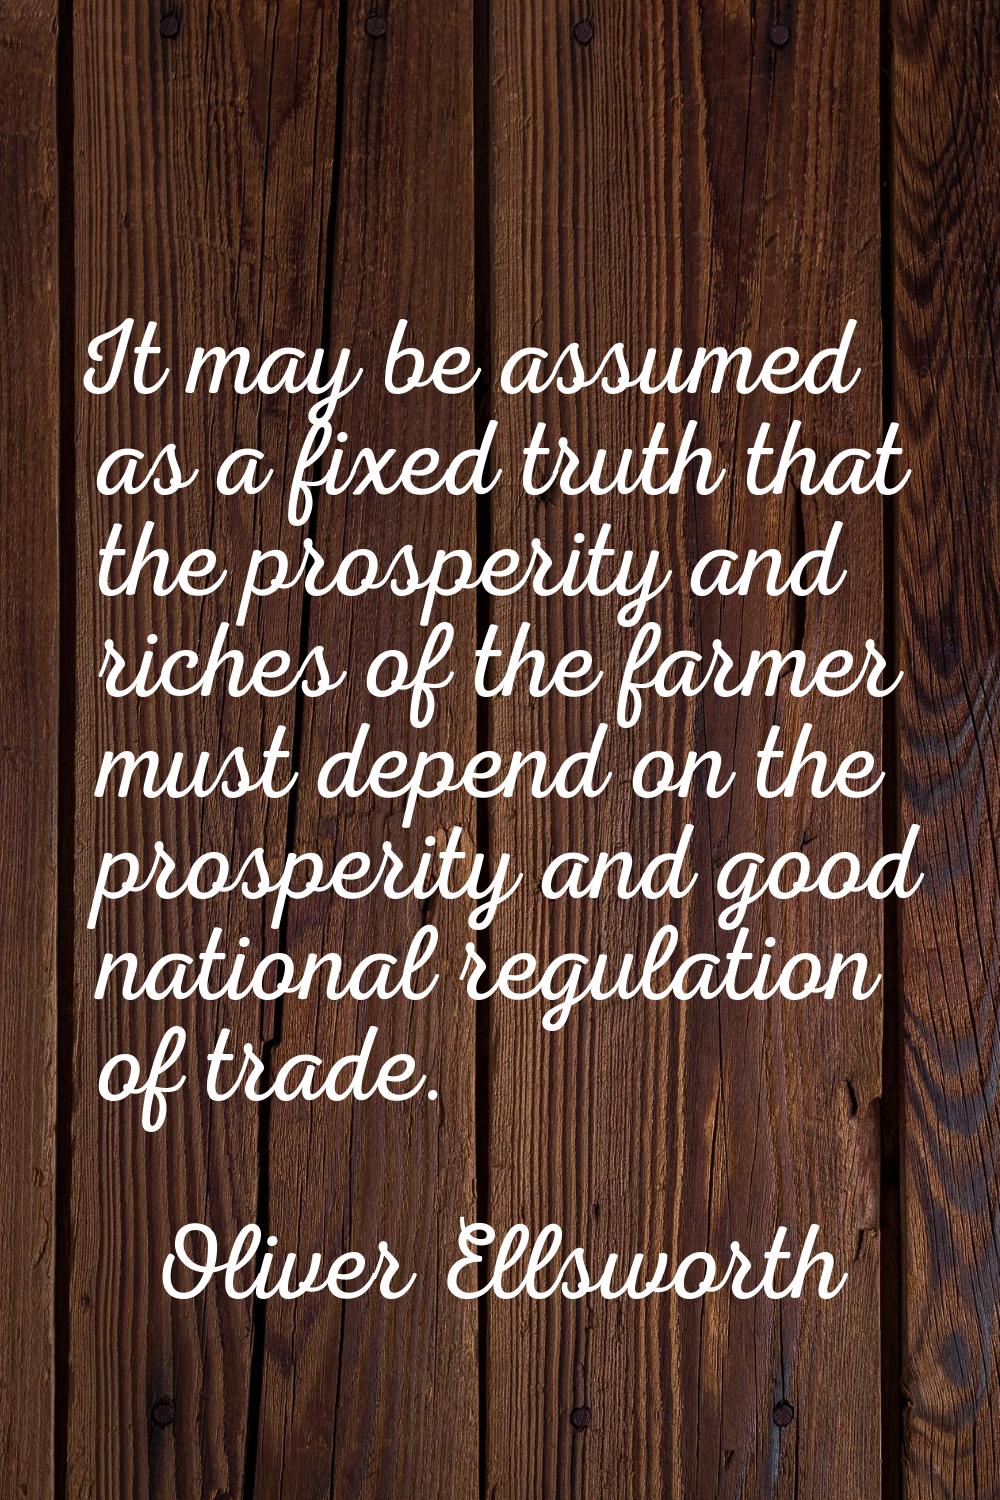 It may be assumed as a fixed truth that the prosperity and riches of the farmer must depend on the 